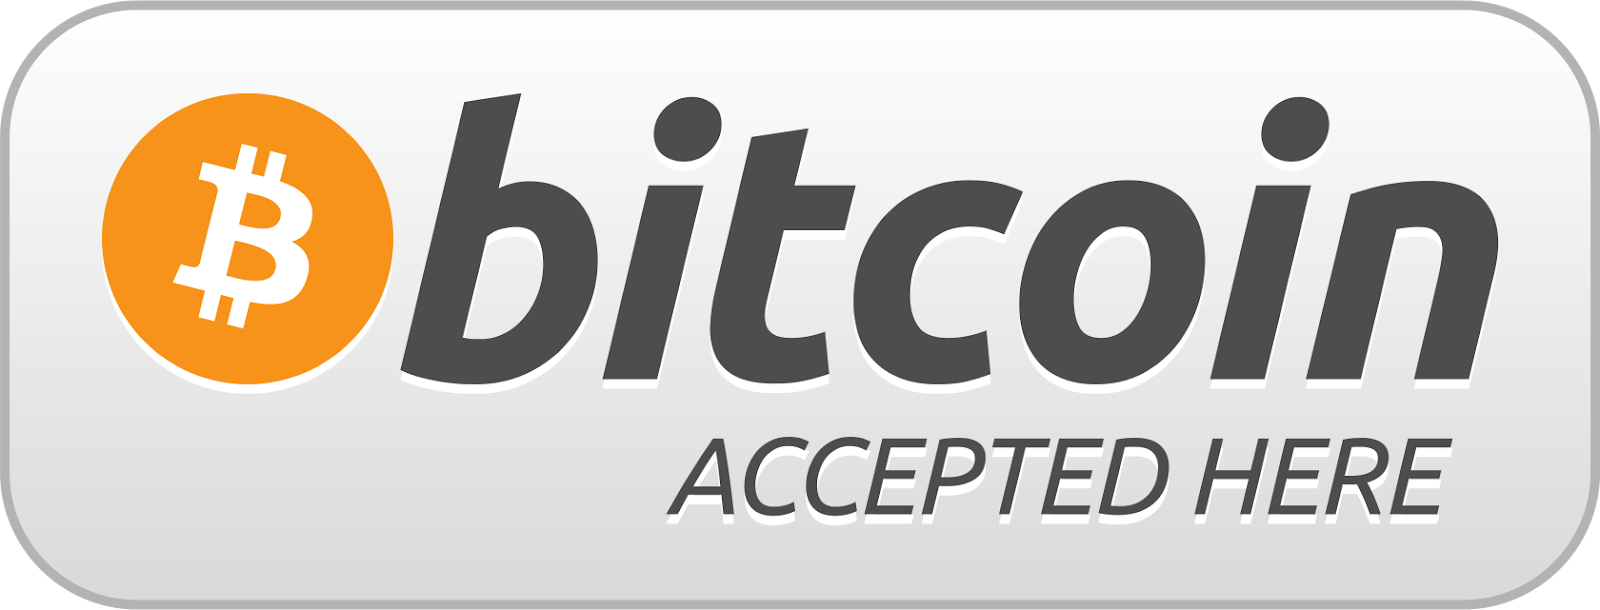 Shopify Meets Bitcoin: How to Accept Bitcoin on Shopify